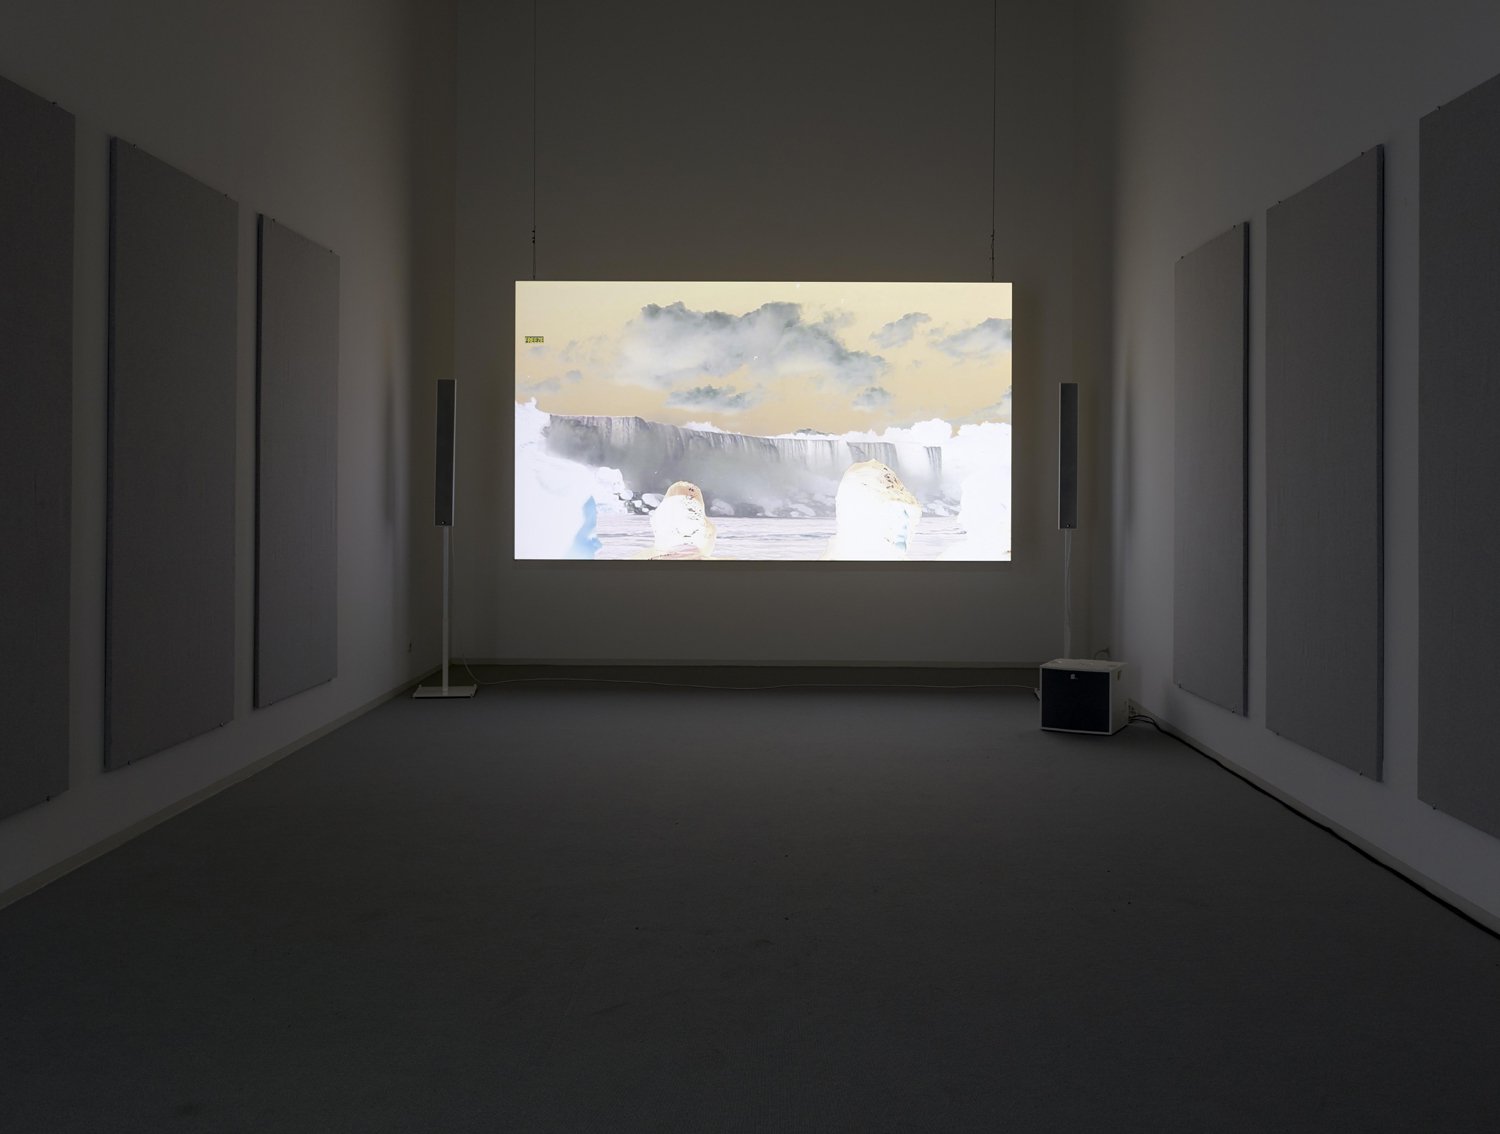 James Richards, Raking Light, 2014, installation view, 2015, Bonner Kunstverein, produced by Centre d’Art Contemporain de Genève for the BIM 14, with the support of Fmac, FCAC and MONA MUSEUM. Courtesy of the artist, Cabinet, London, and Rodeo, London and Istanbul. Photo: Simon Vogel